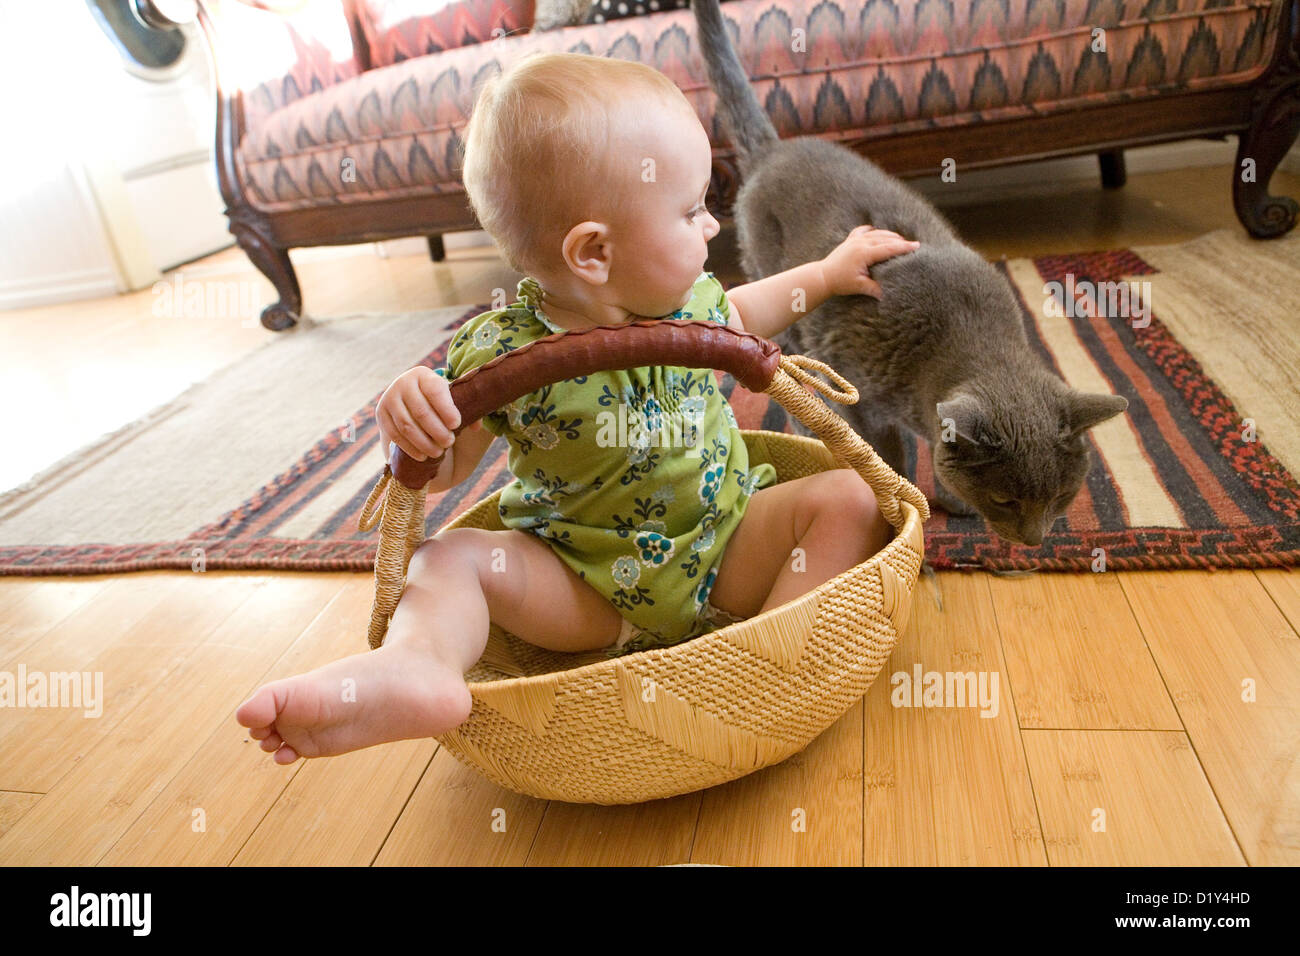 Baby in a basket with a cat Stock Photo